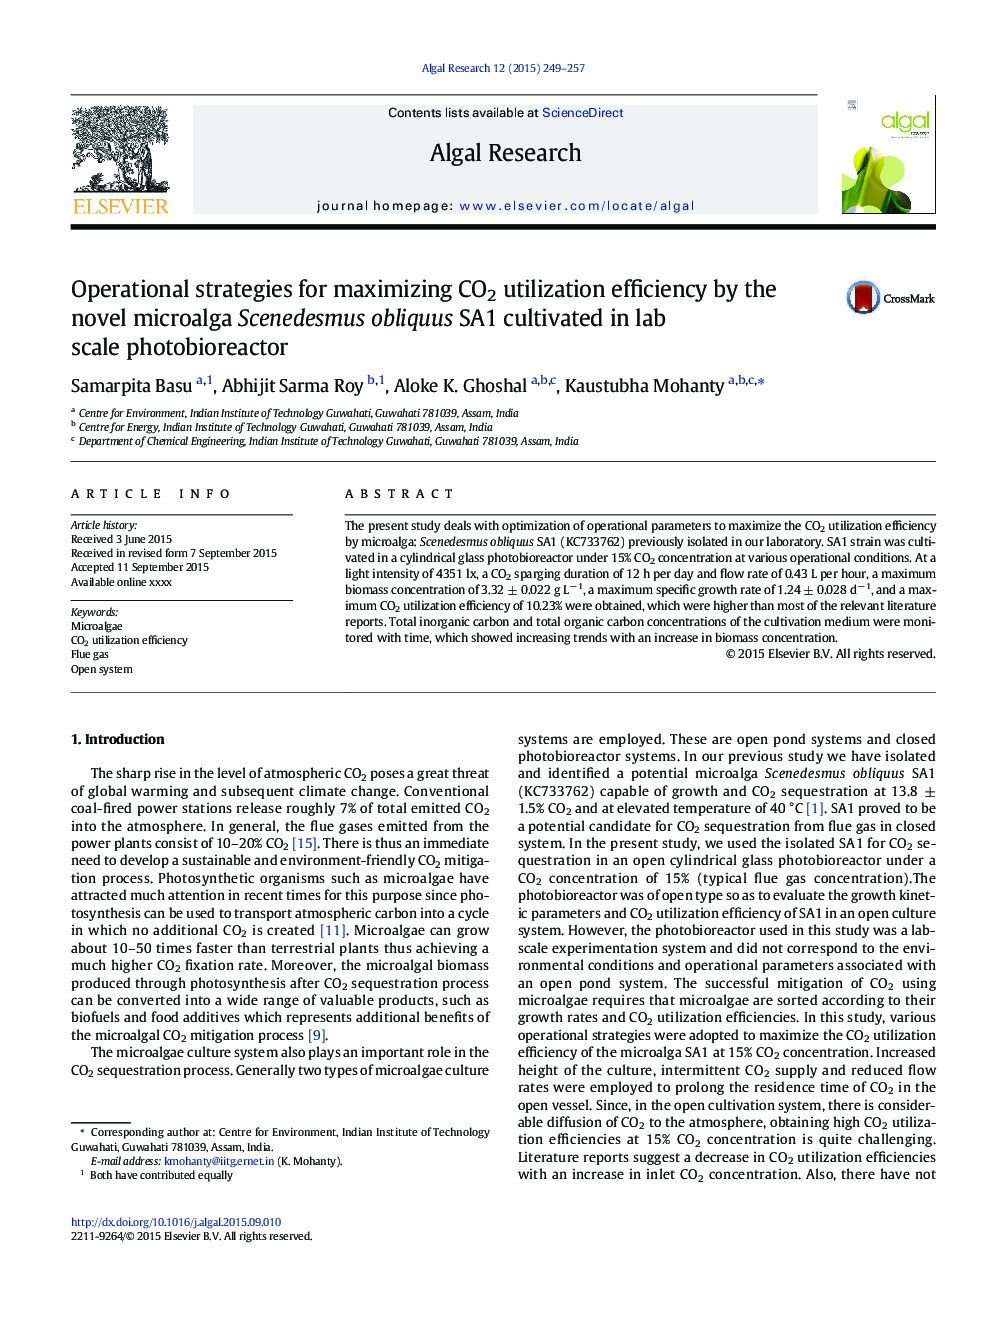 Operational strategies for maximizing CO2 utilization efficiency by the novel microalga Scenedesmus obliquus SA1 cultivated in lab scale photobioreactor